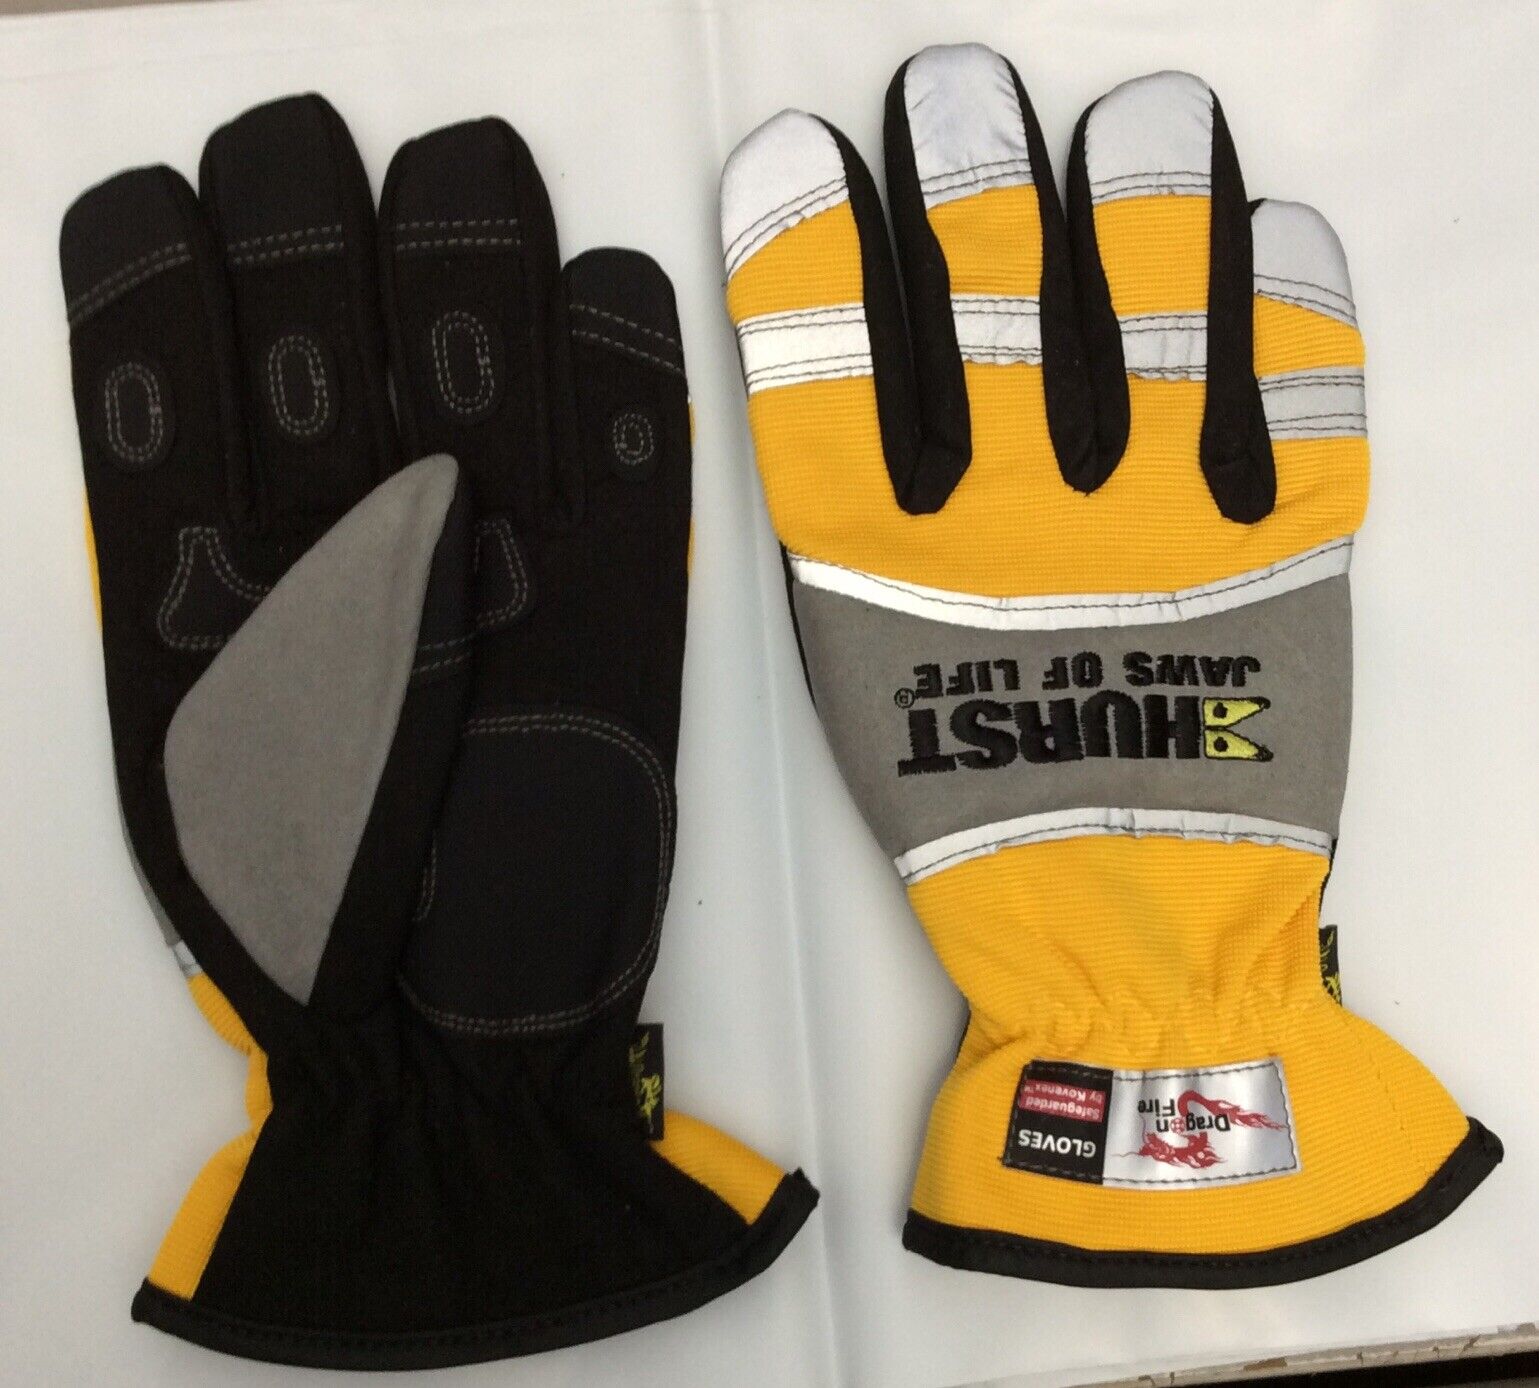 Dragon Fire XL Hurst Jaws of Life Fire Safety Extrication Gloves